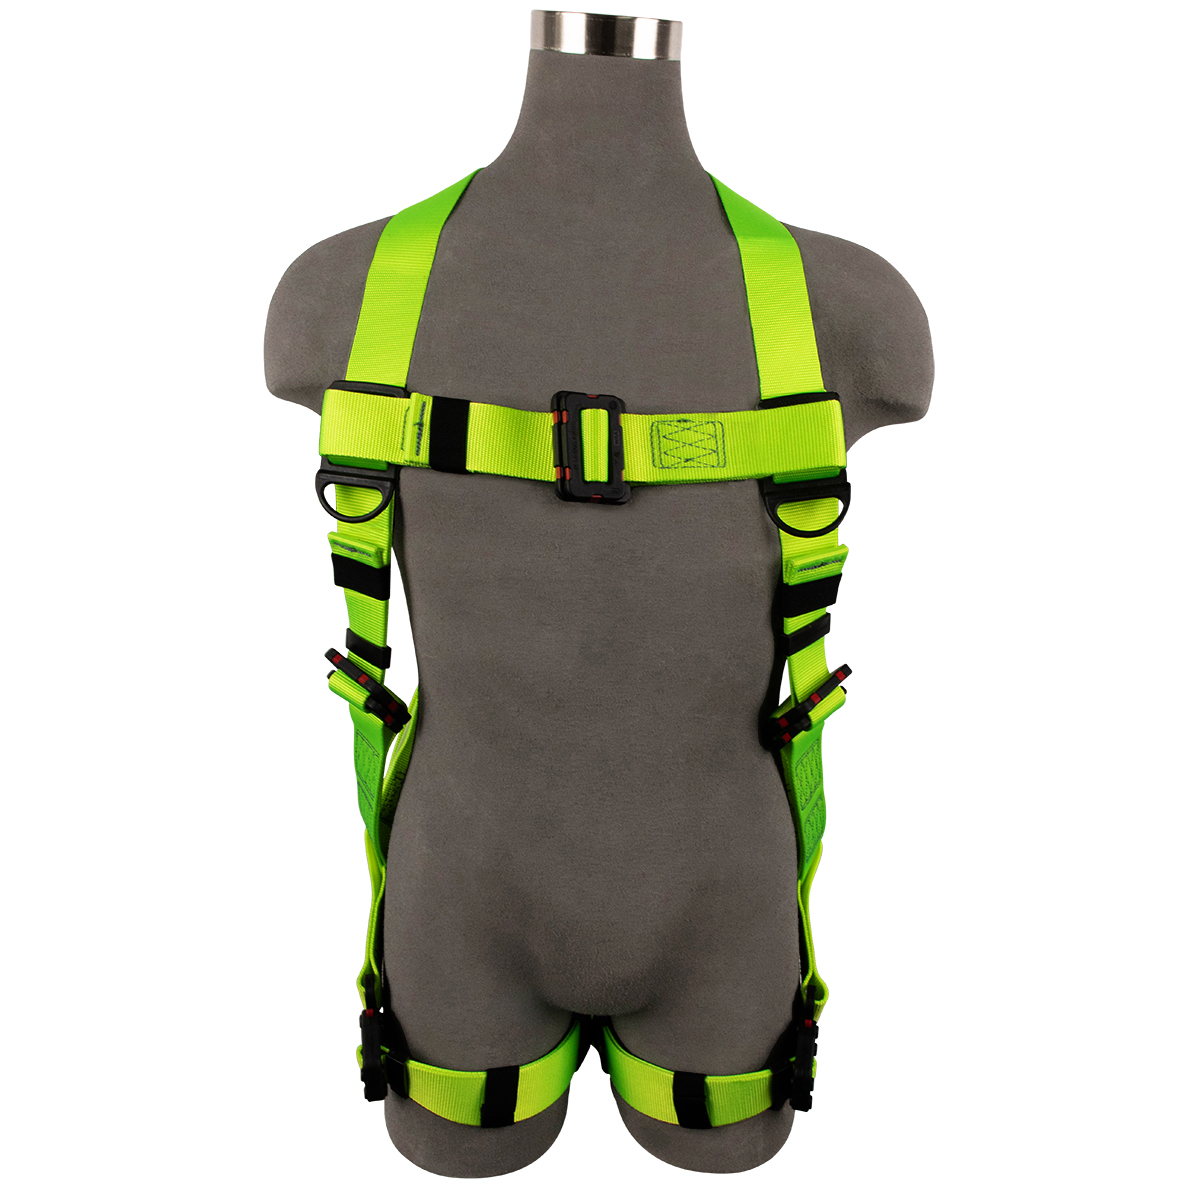 SAFEWAZE PRO+ Arc Flash Dielectric Harness with Pass through Dielectric on Chest and Quick-Connect Legs with Soft Loop Back D-Ring: 3XL